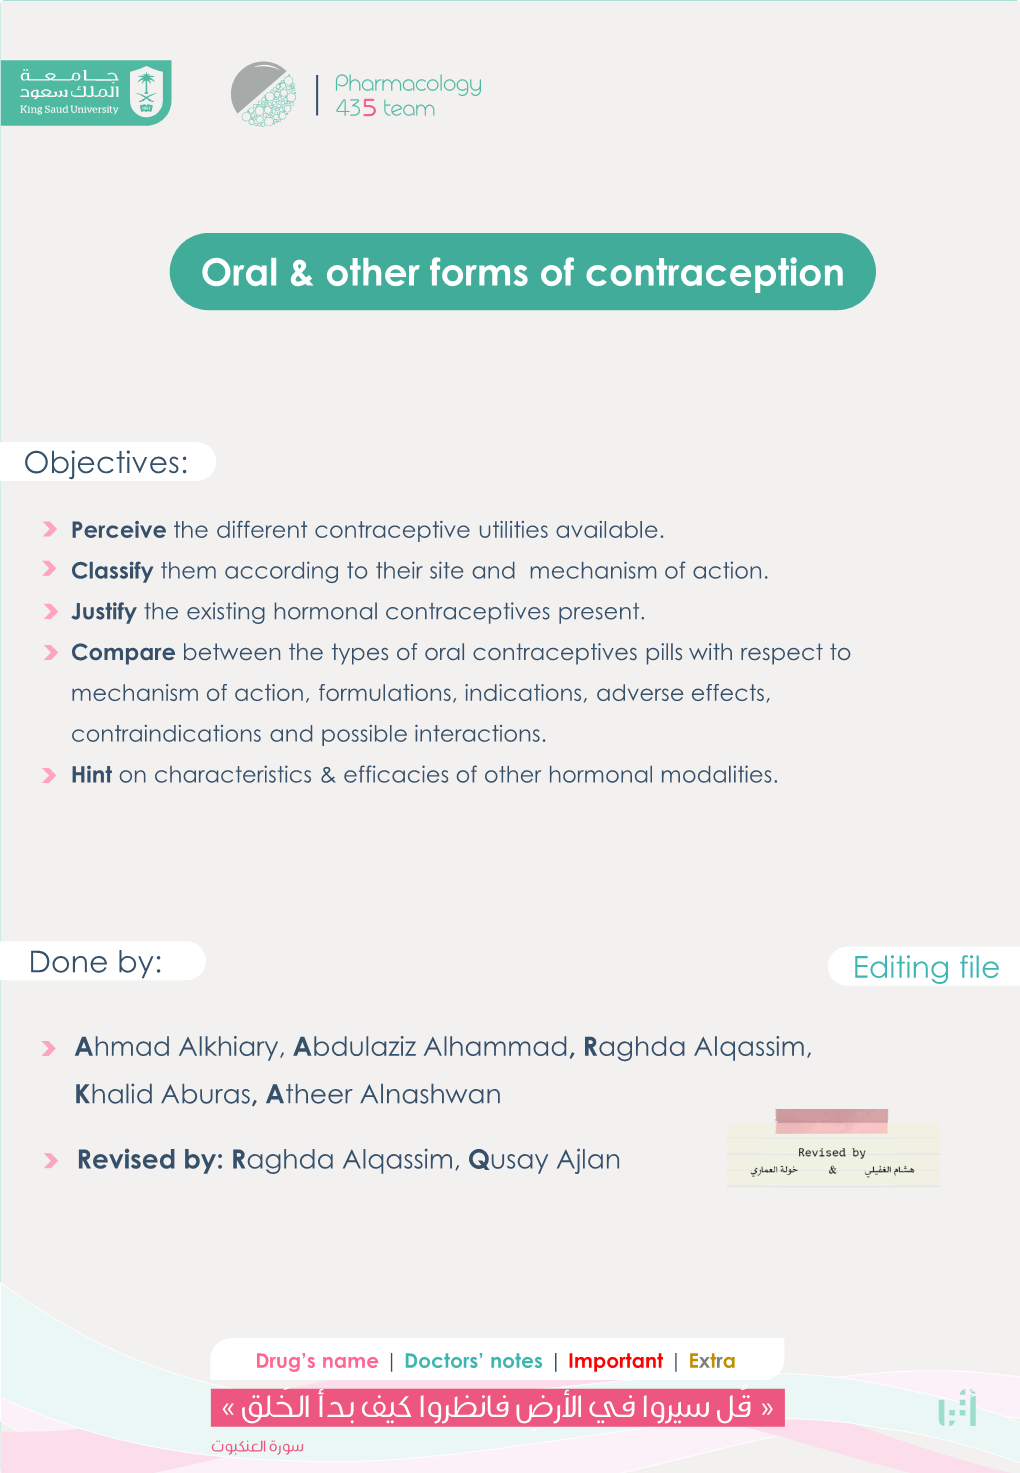 Oral & Other Forms of Contraception